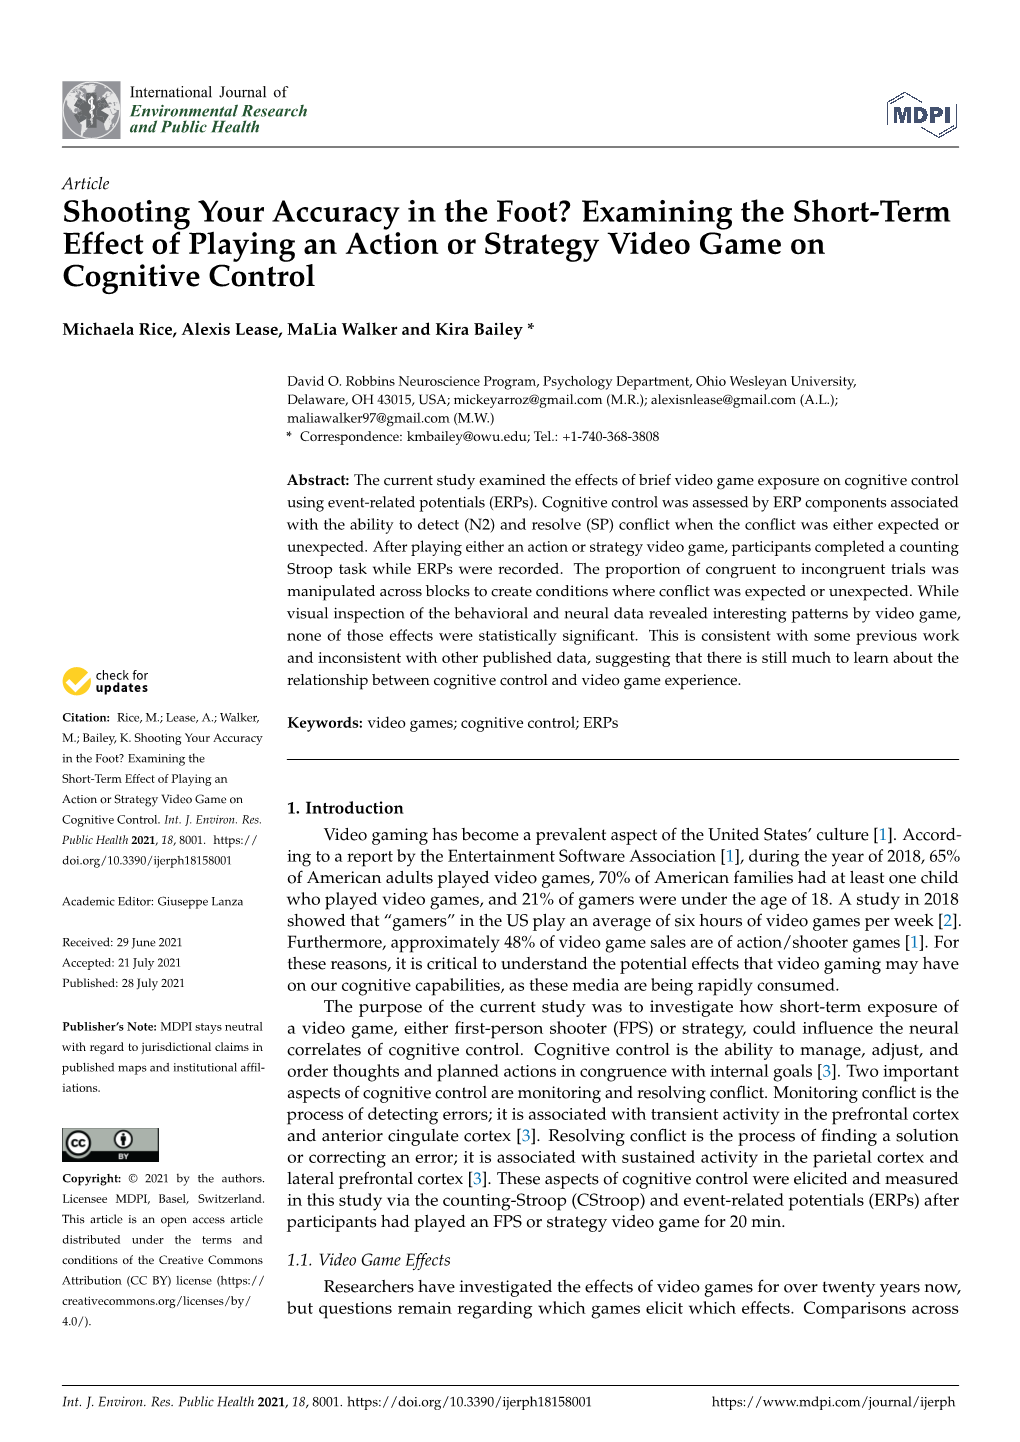 Shooting Your Accuracy in the Foot? Examining the Short-Term Effect of Playing an Action Or Strategy Video Game on Cognitive Control